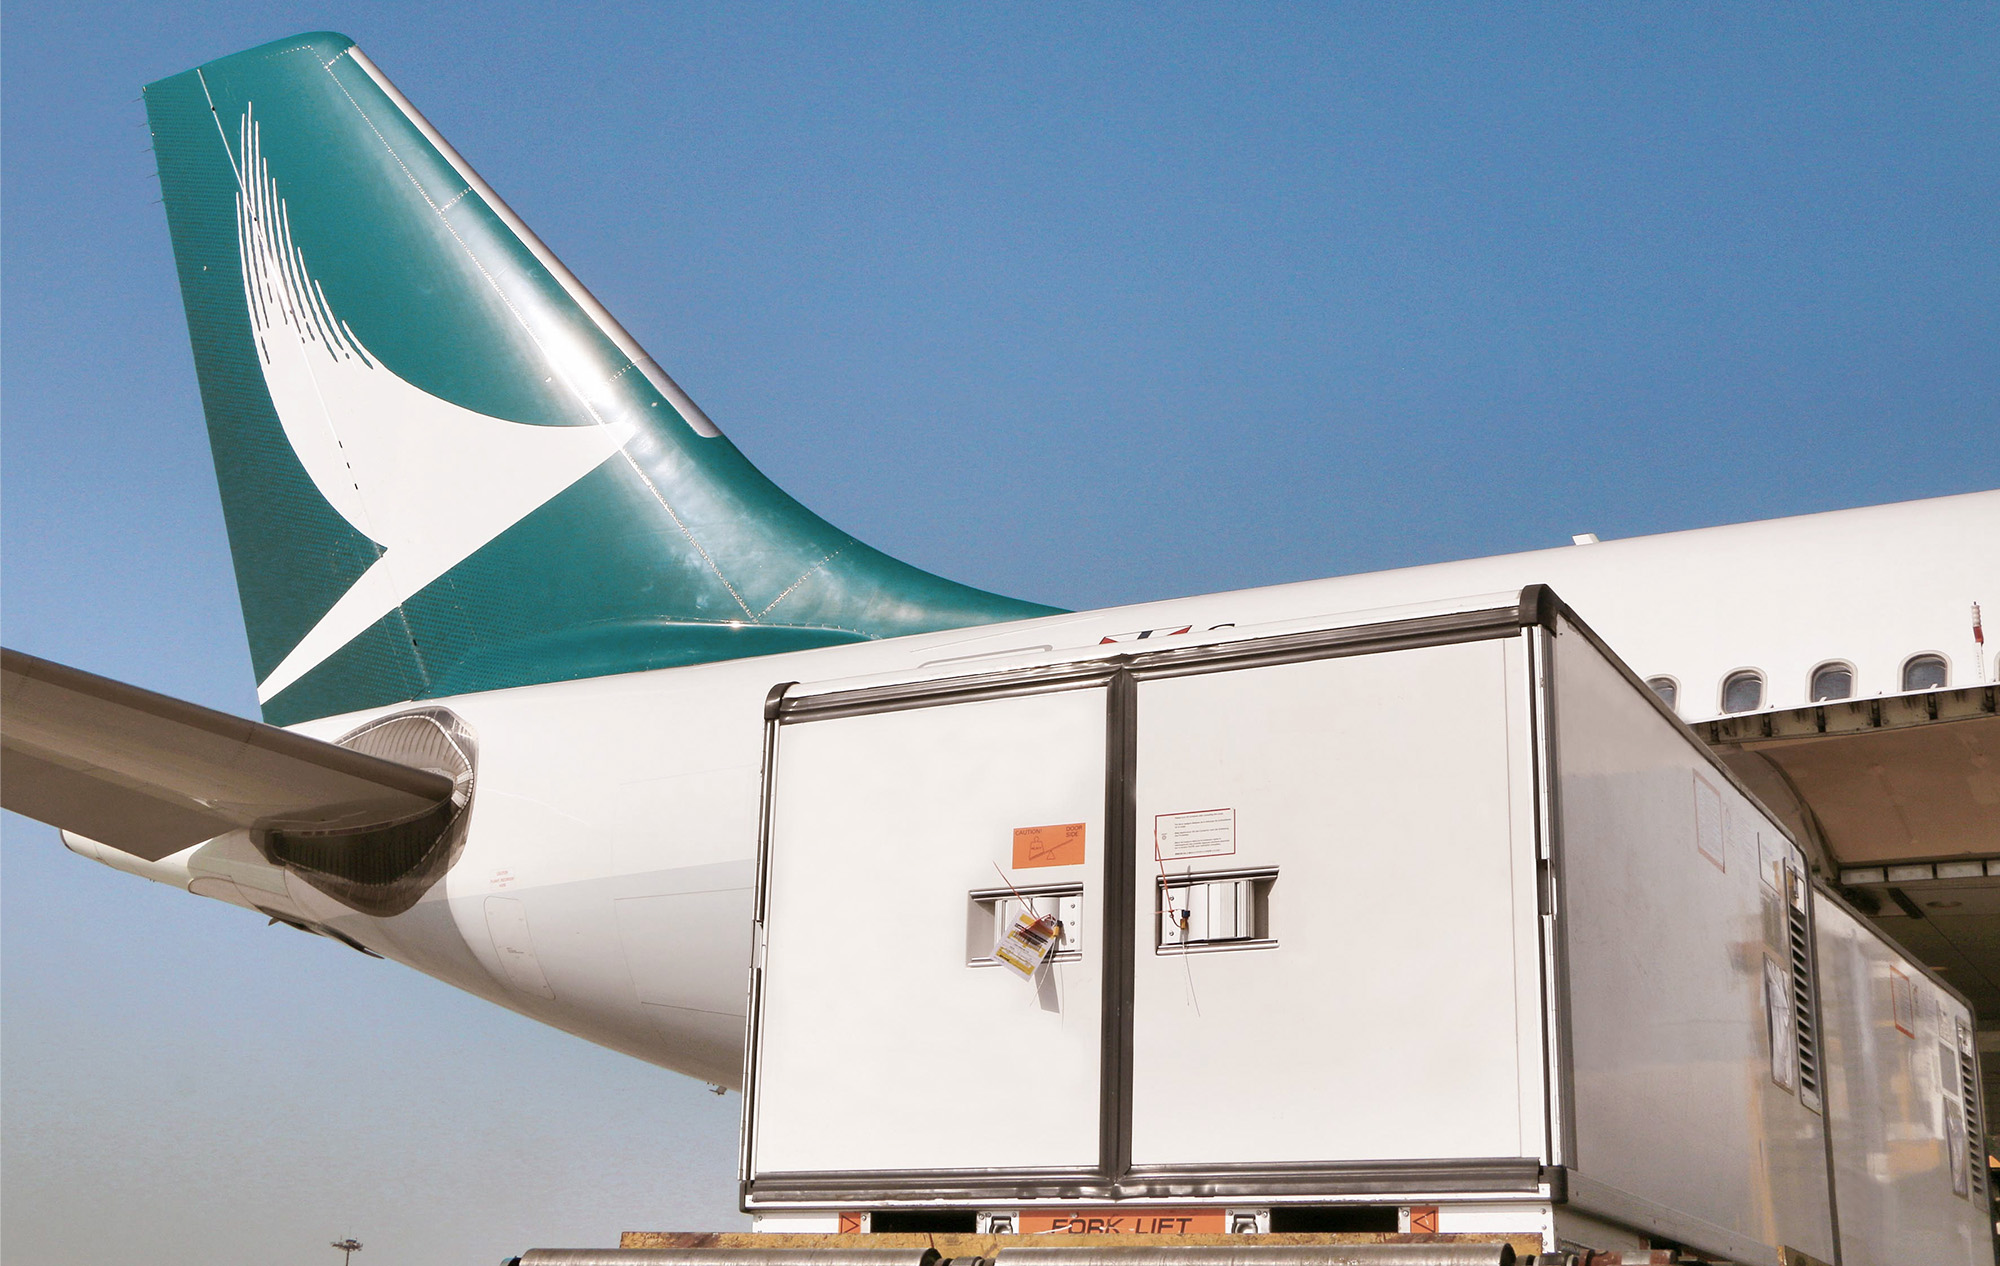 A Cathay Pacific tailfin with a container being loaded